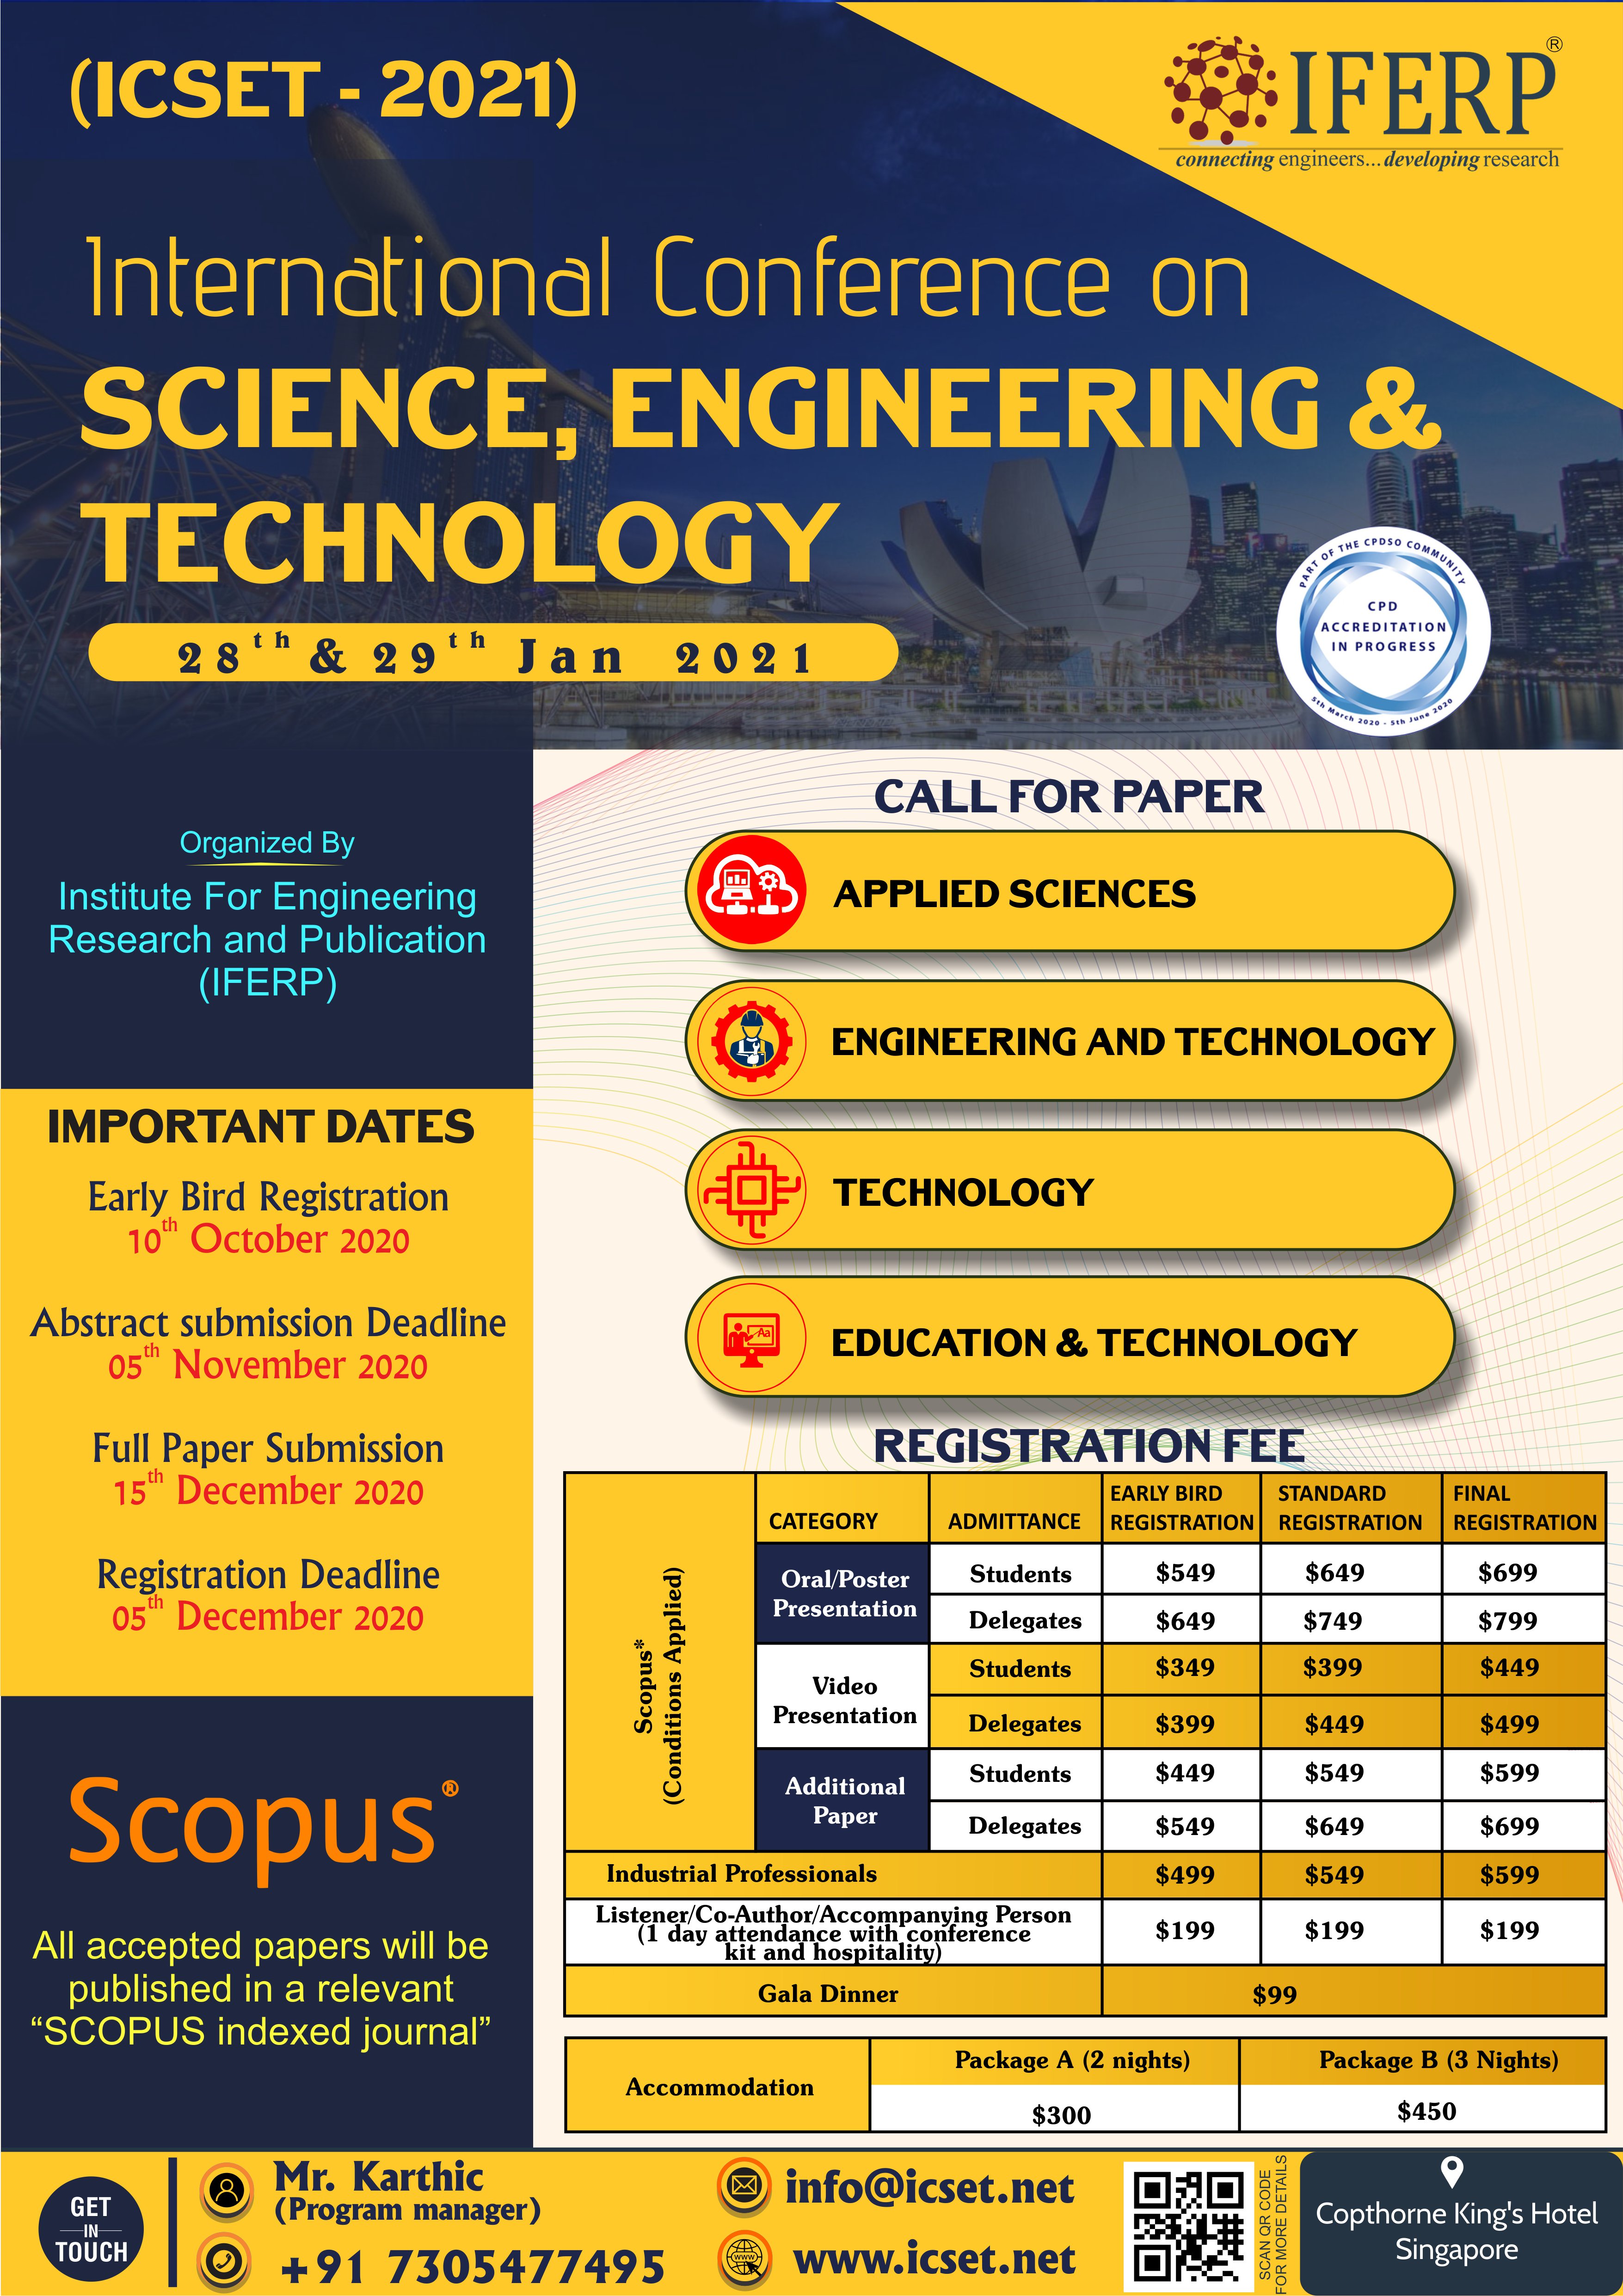 International Conference on Science, Engineering & Technology (ICSET-2021), Singapore, Central, Singapore